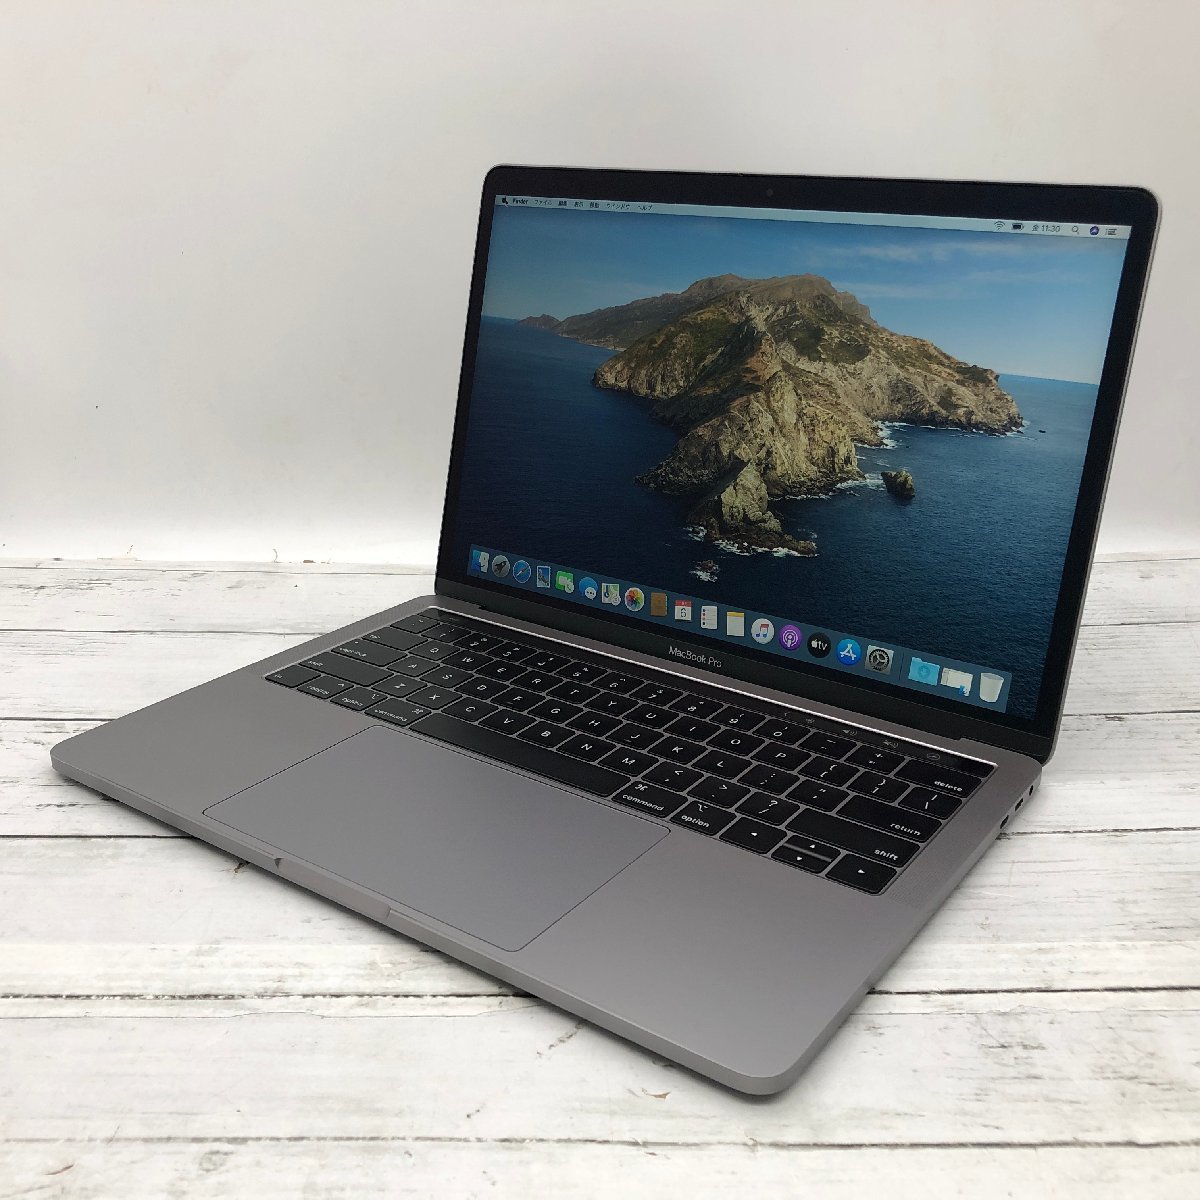 Apple MacBook Pro 13-inch 2019 Four Thunderbolt 3 ports Core i7 2.80GHz/16GB/256GB(NVMe) 〔A0130〕